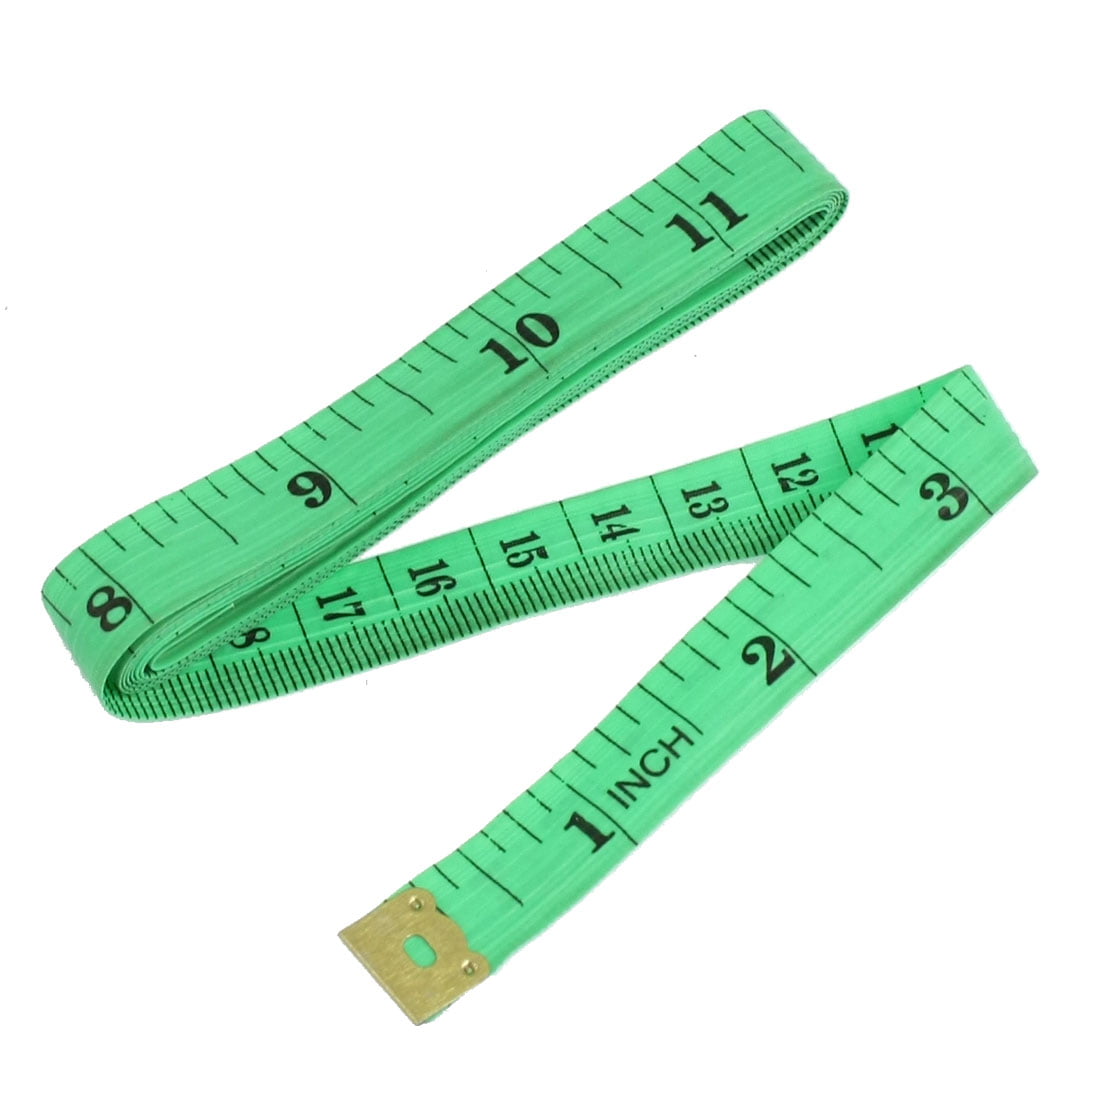 5Pcs Retractable Body Measuring Ruler Sewing Cloth Tailor Tape 60" 1.5M VAUS 